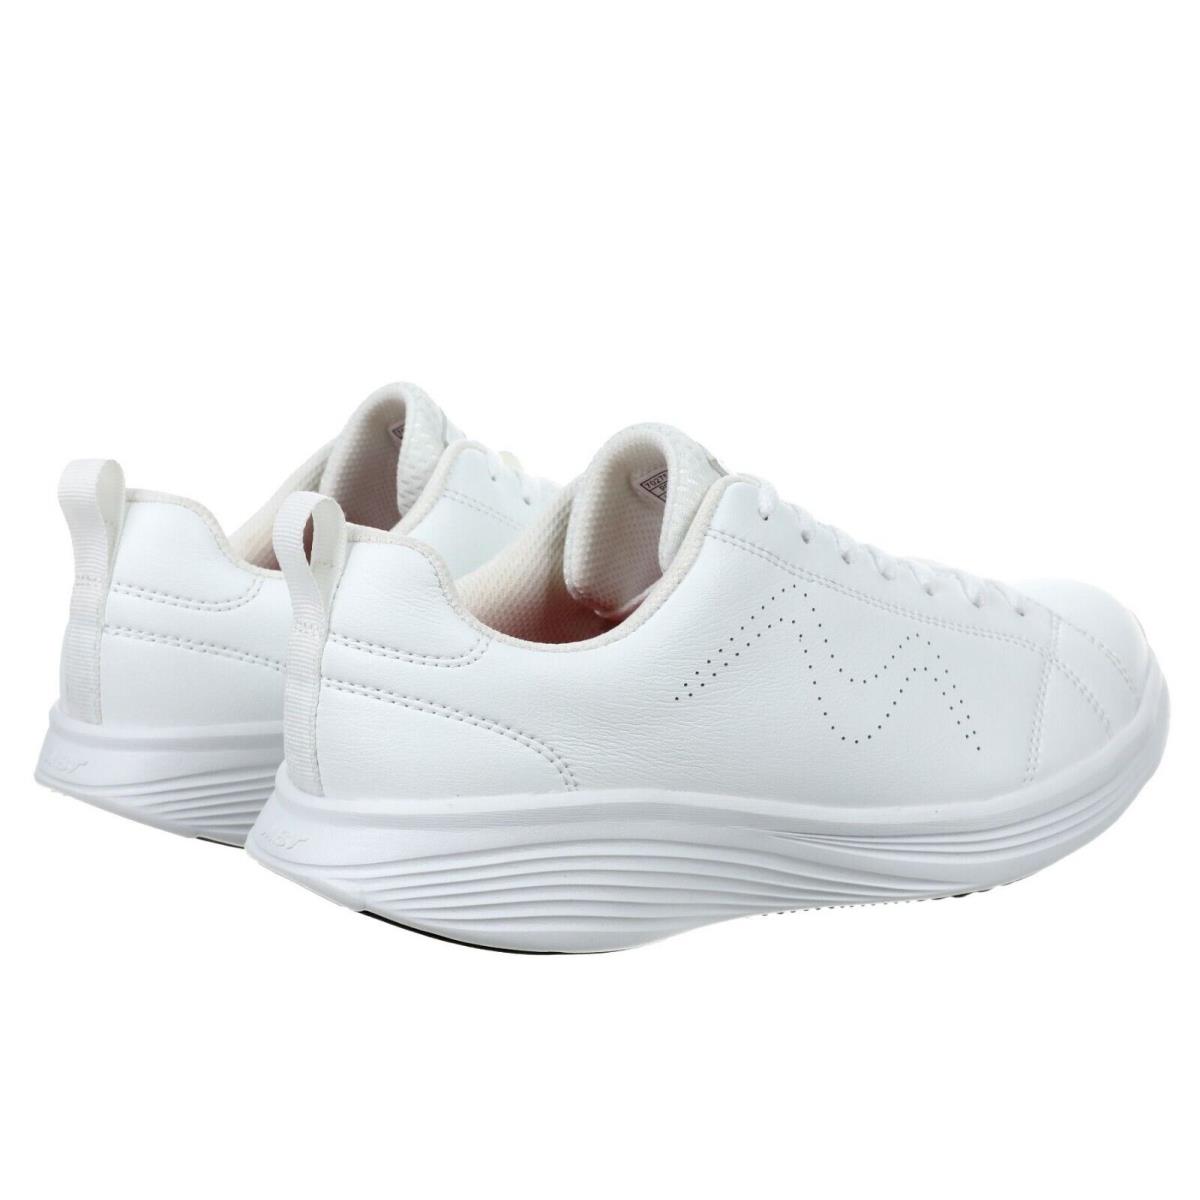 MBT shoes  - White 4